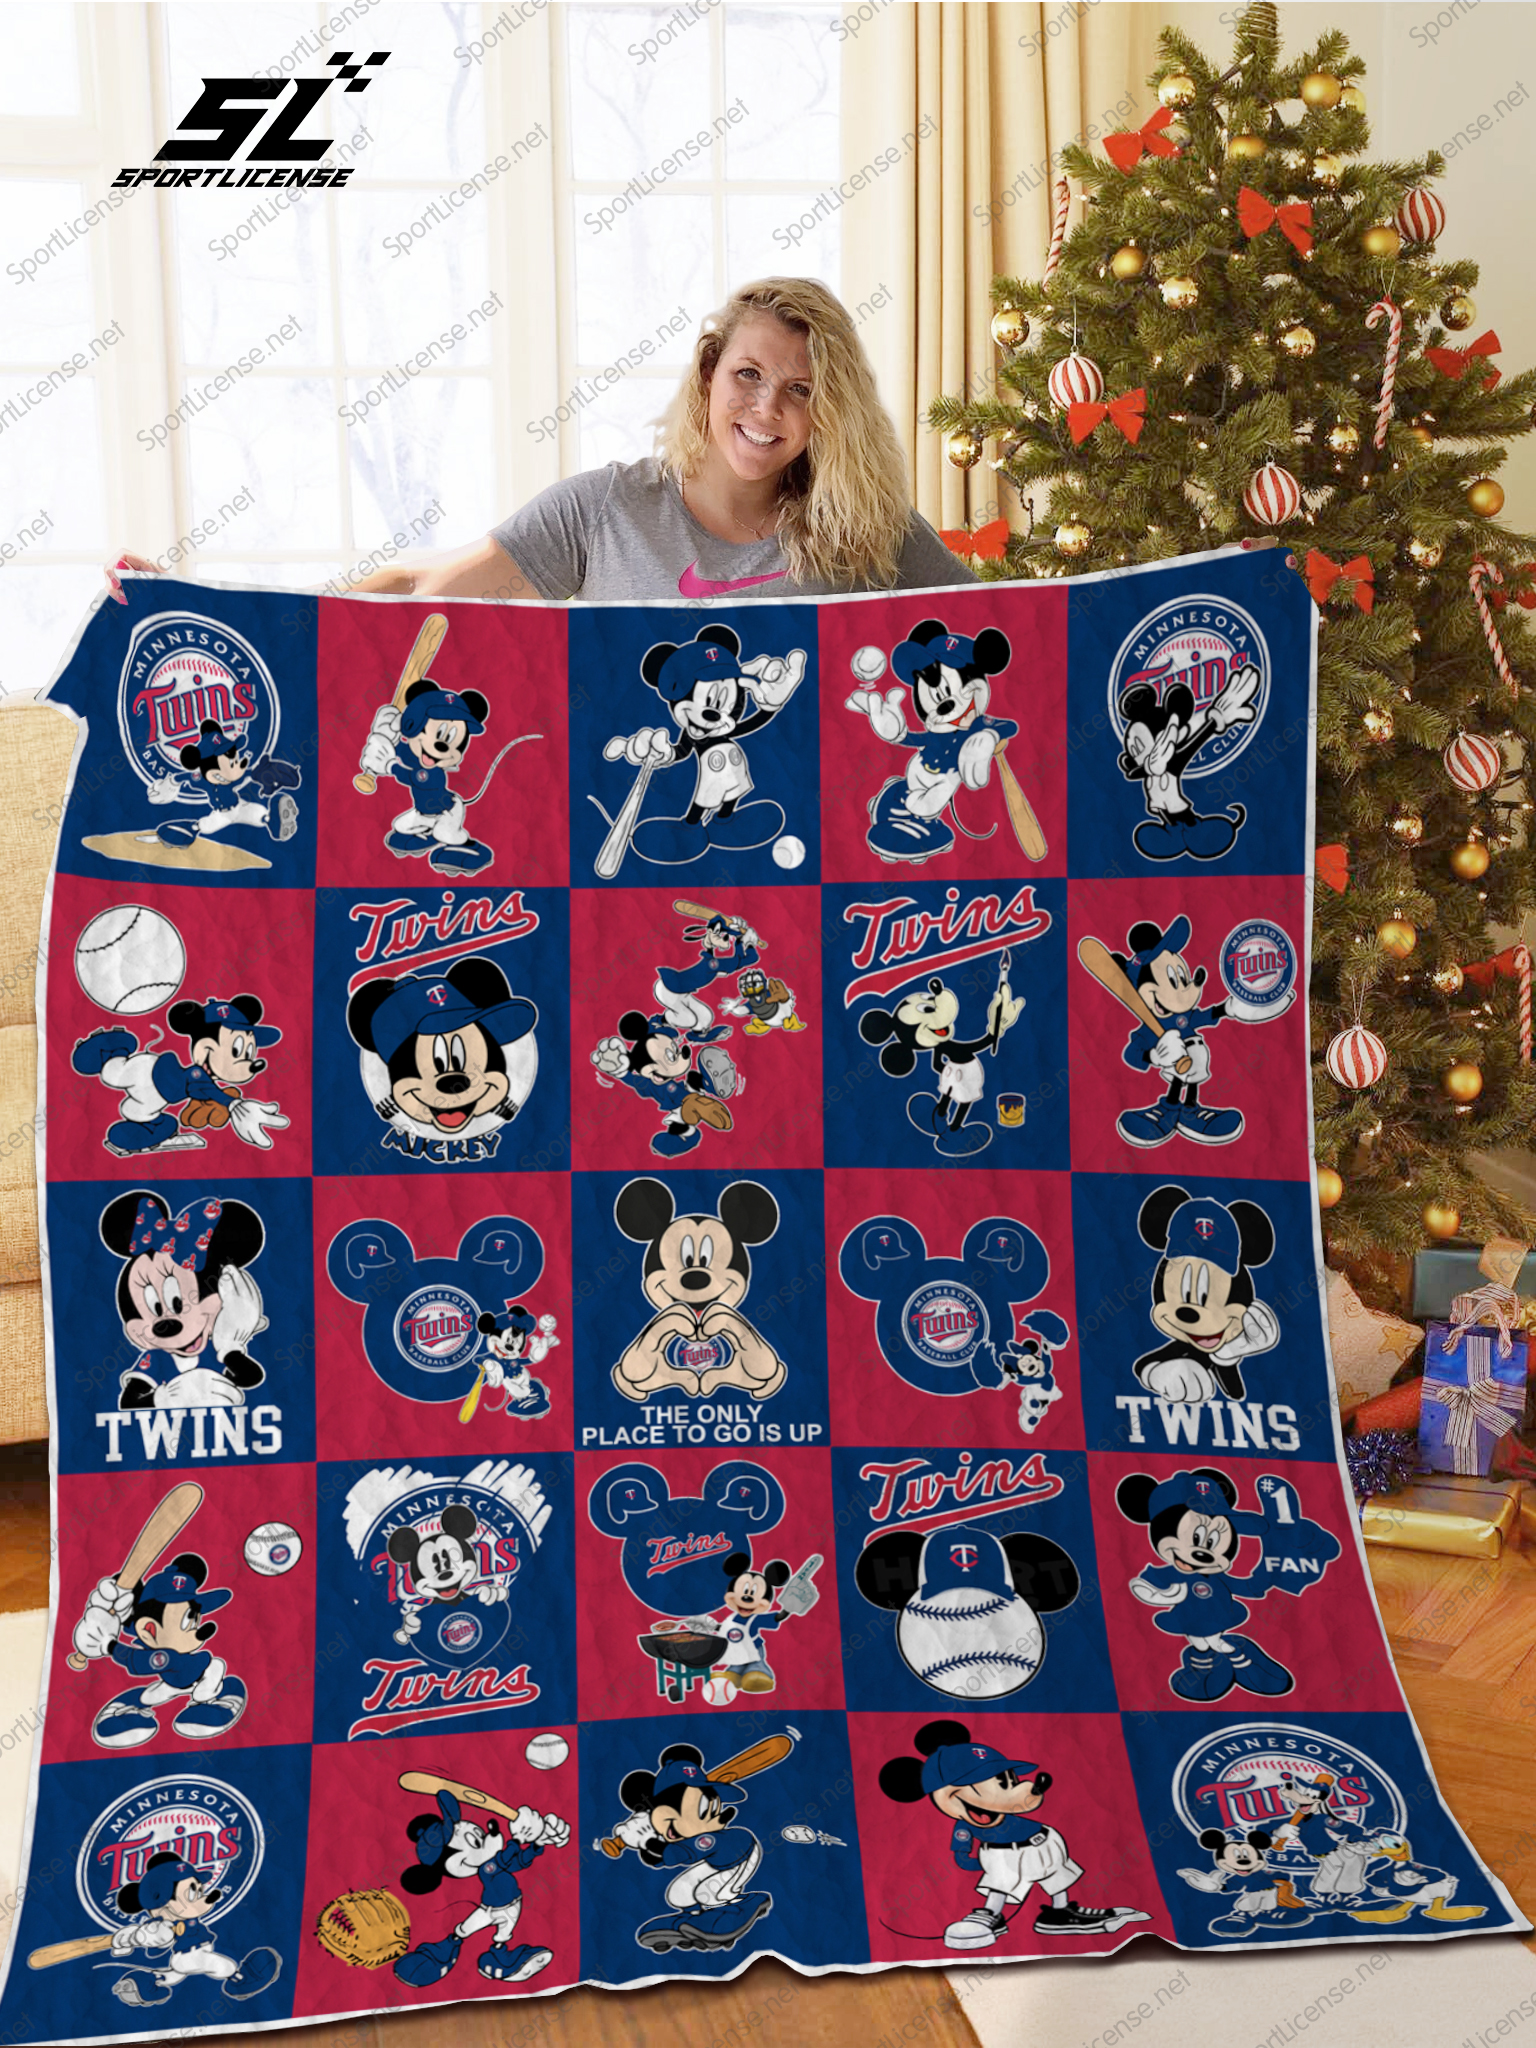 Minnesota Twins Quilt Blanket Unique Gift For Fans Lover 